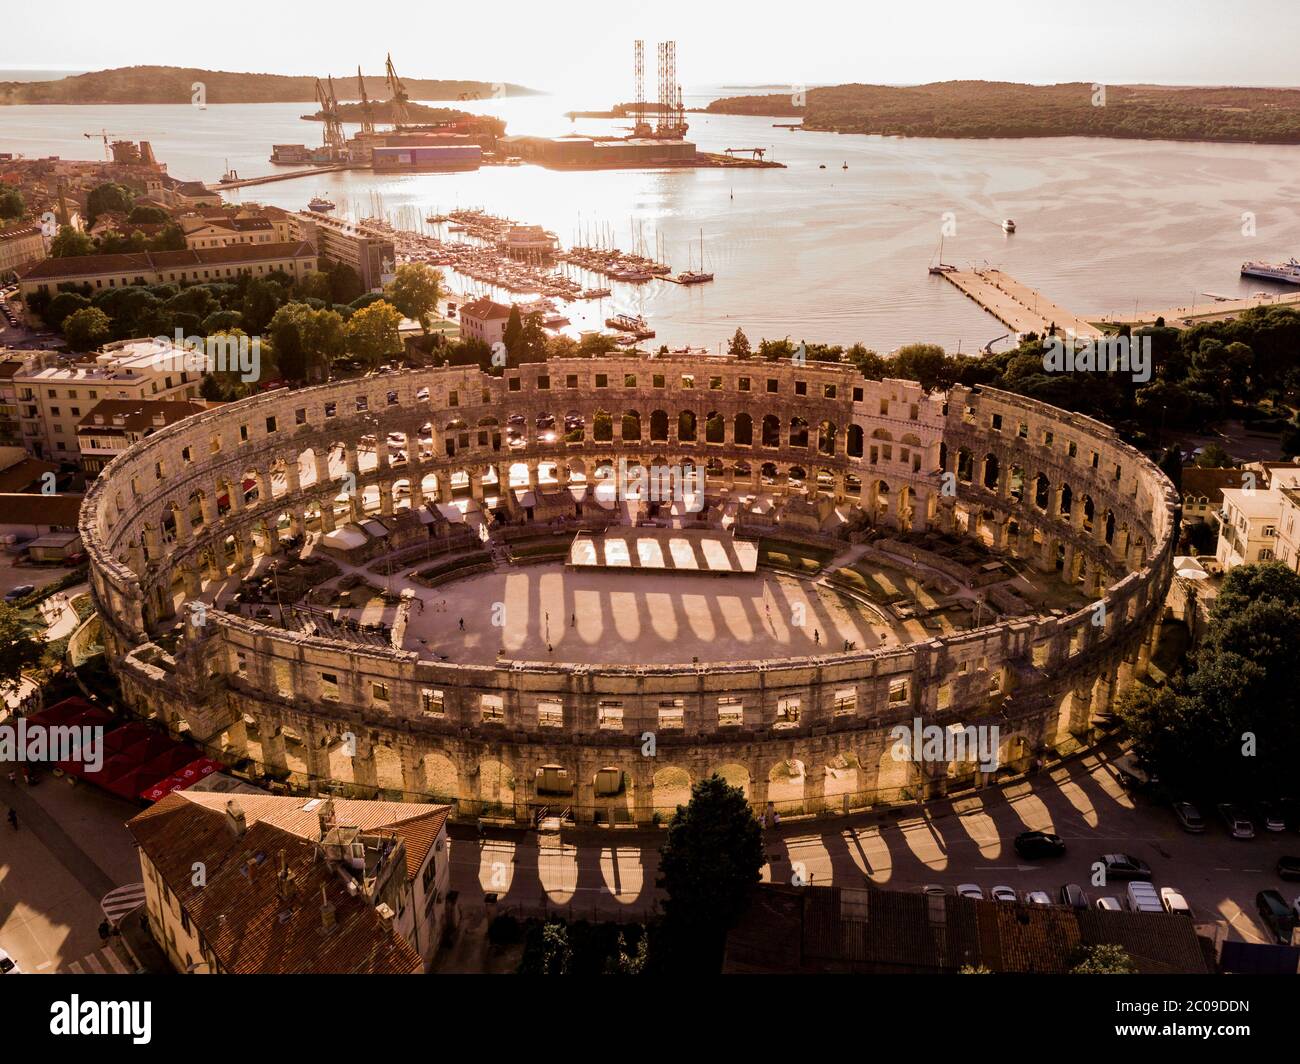 Late afternoon shot of Pula Arena from the drone Stock Photo